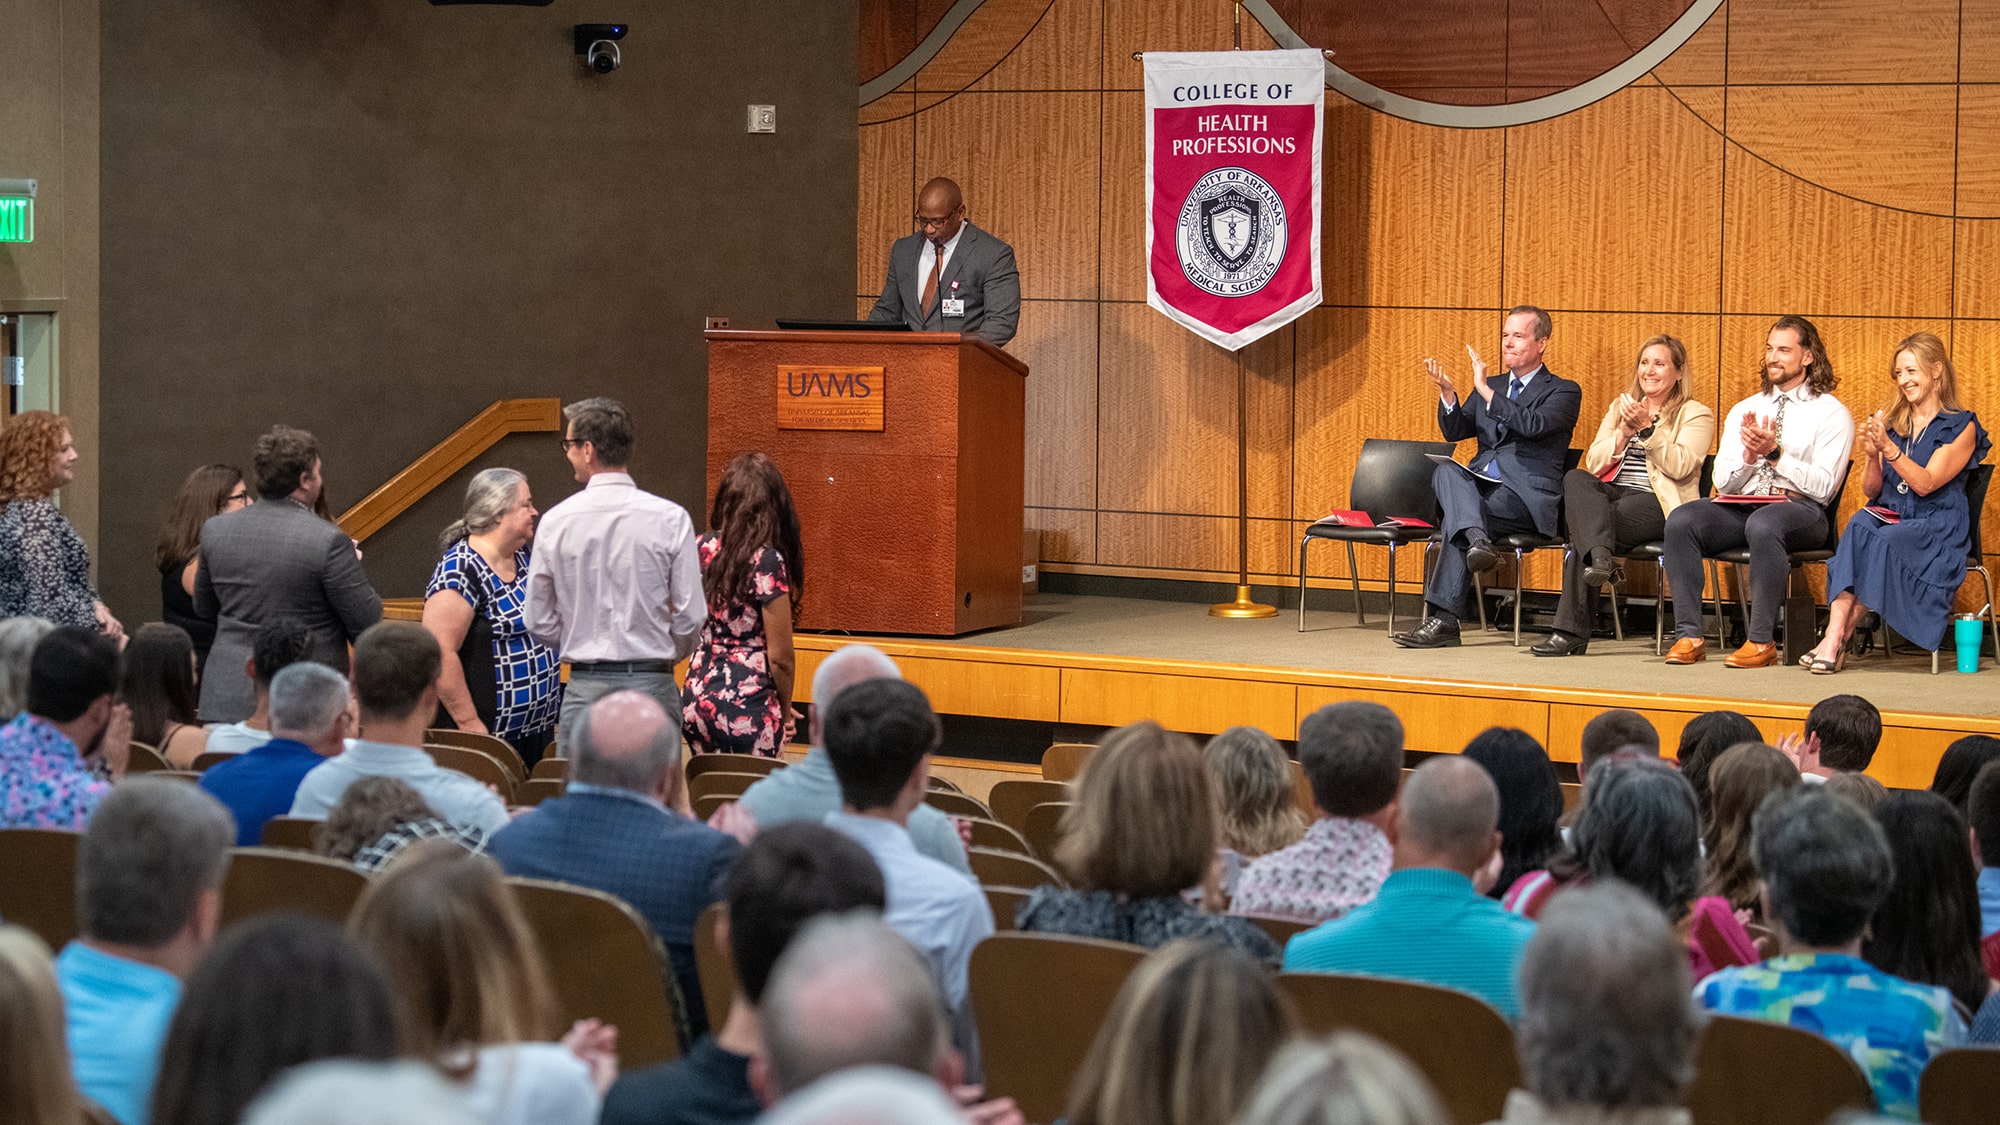 Physician Assistant Studies faculty members stand and receive applause at the valediction ceremony for the Class of 2023. Edward Williams stands and the lectern, left, as Chancellor Cam Patterson, Dean Susan Long, Ryan Toliver and Tiffany Huitt join in the applause.